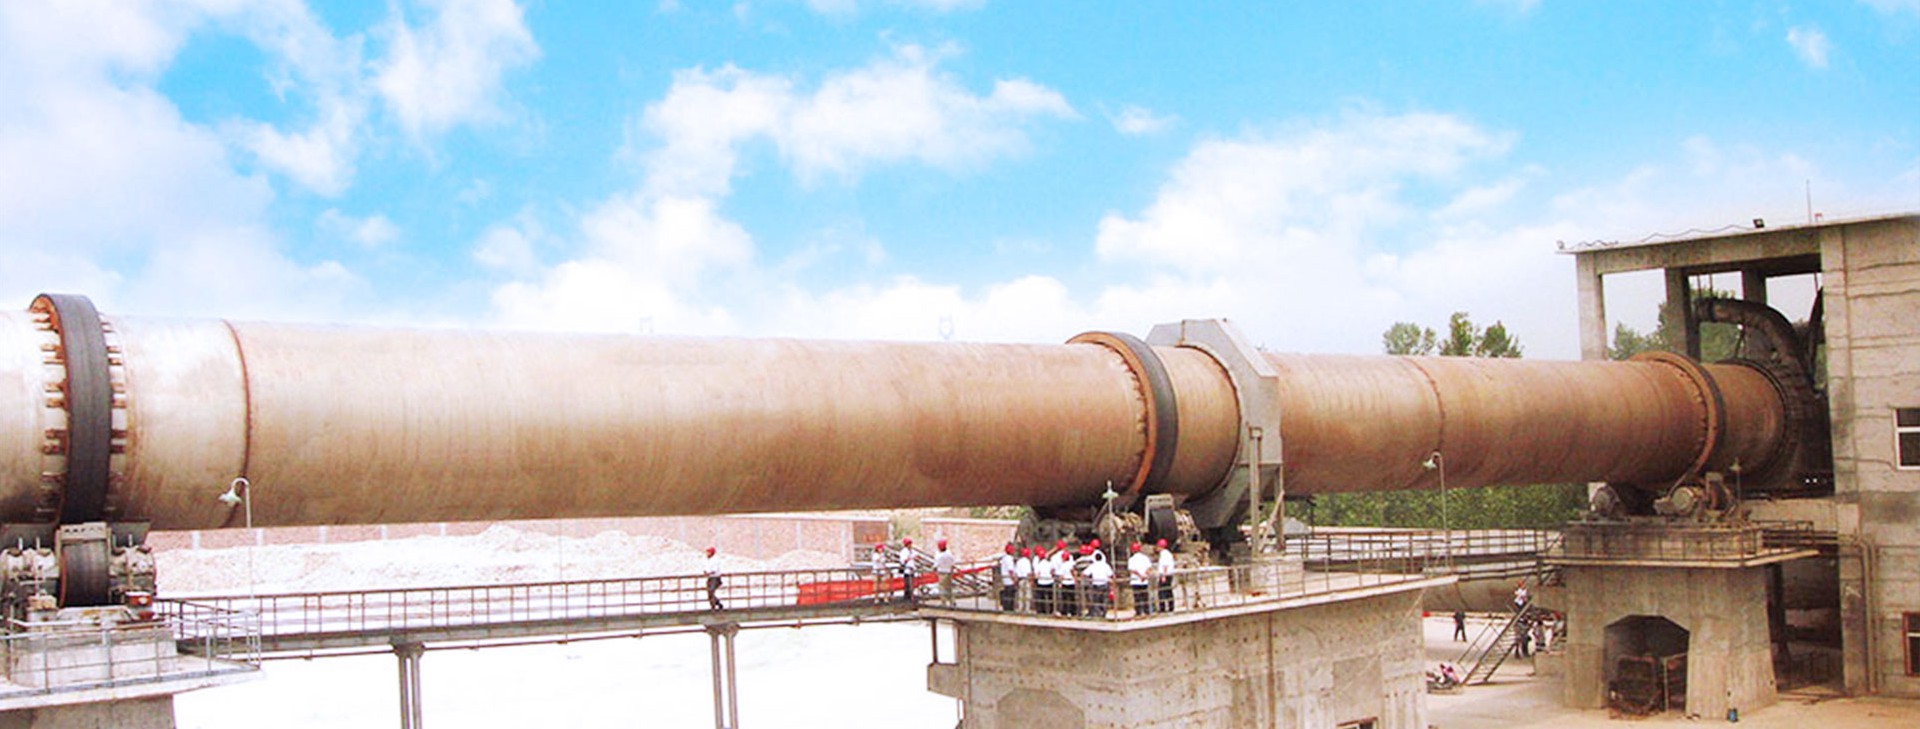 Large Rotary Kiln Production&Processing Base in Central Plains